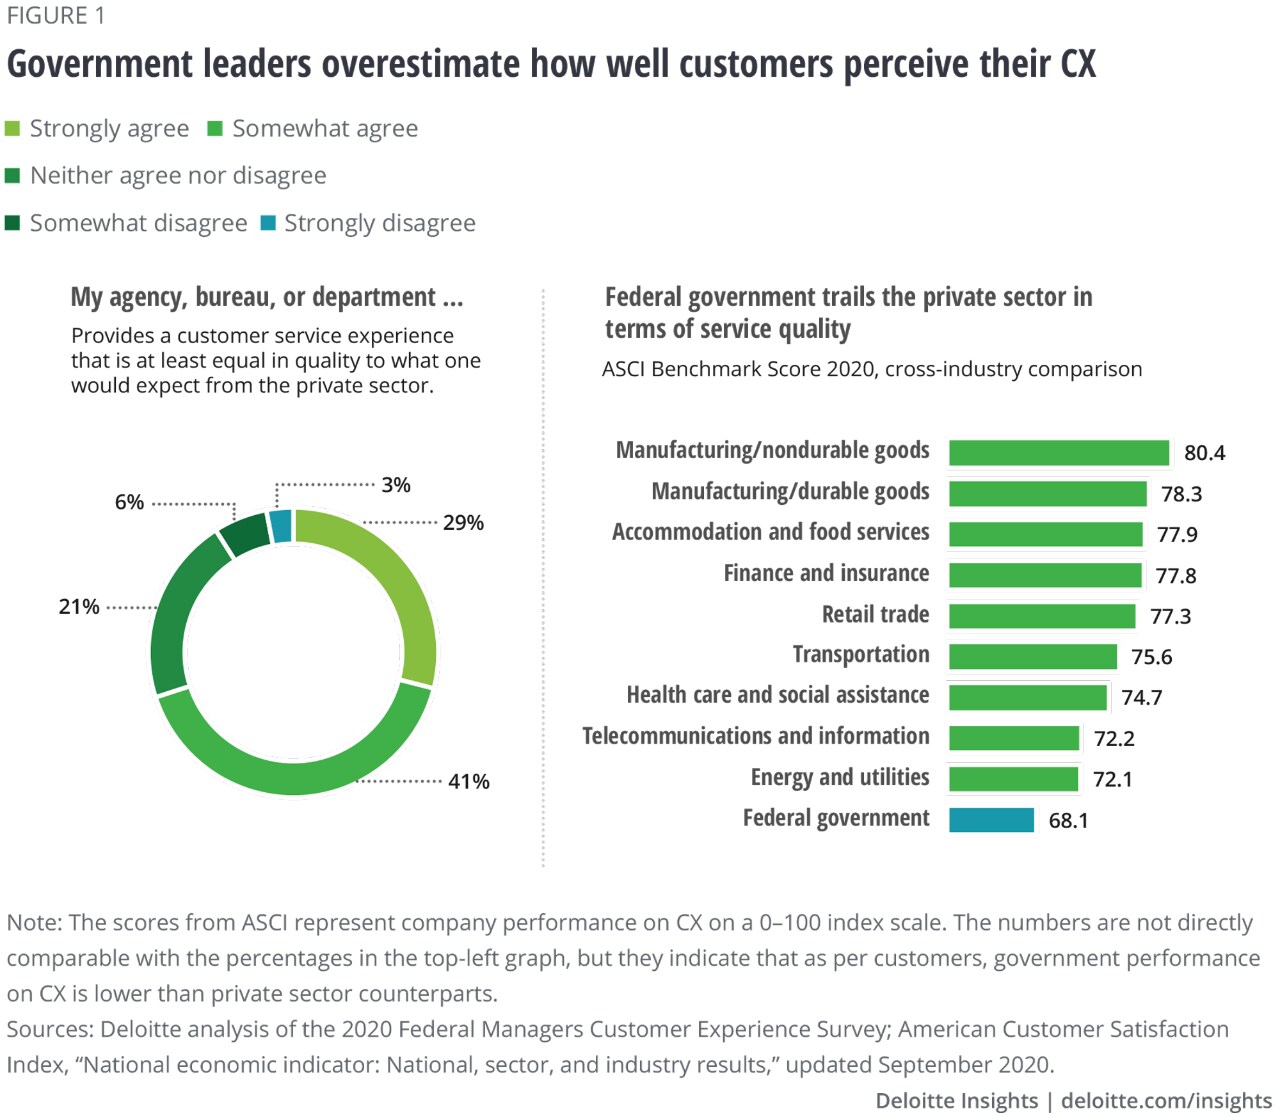 Figure 1. Government leaders overestimate how well customers perceive their CX